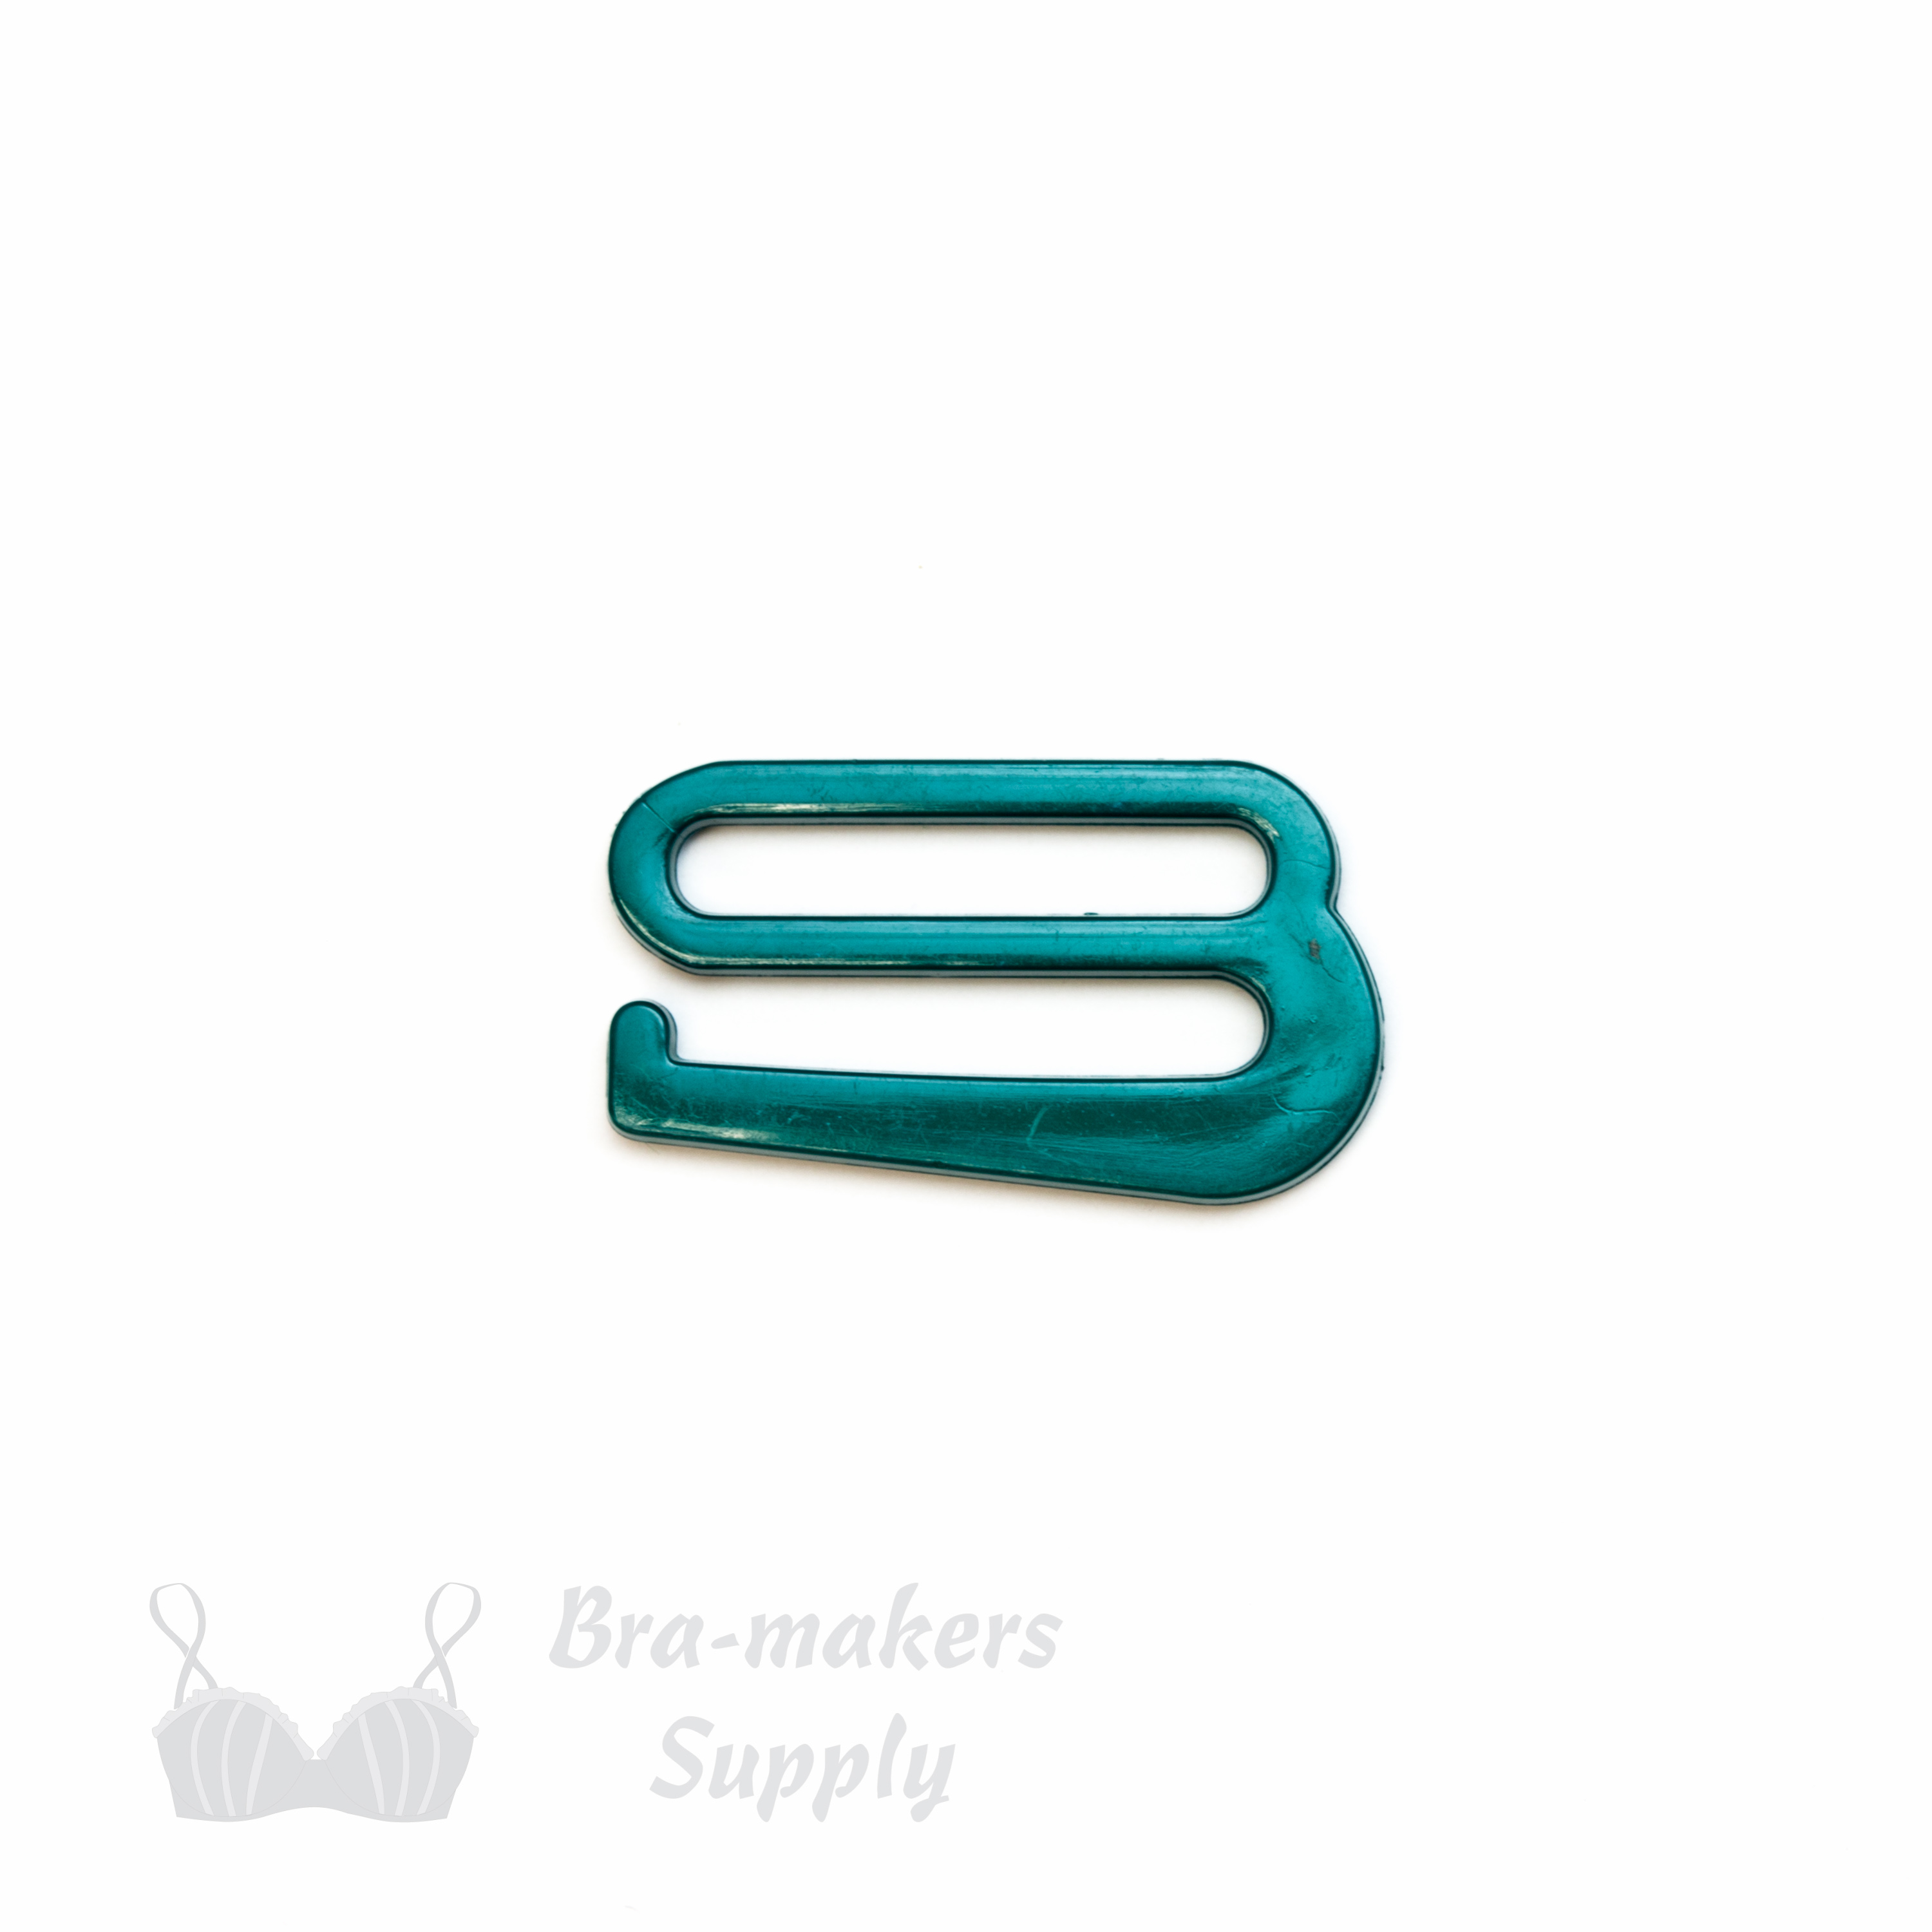 Swimwear Connectors Clips and Fasteners - Bra-makers Supply